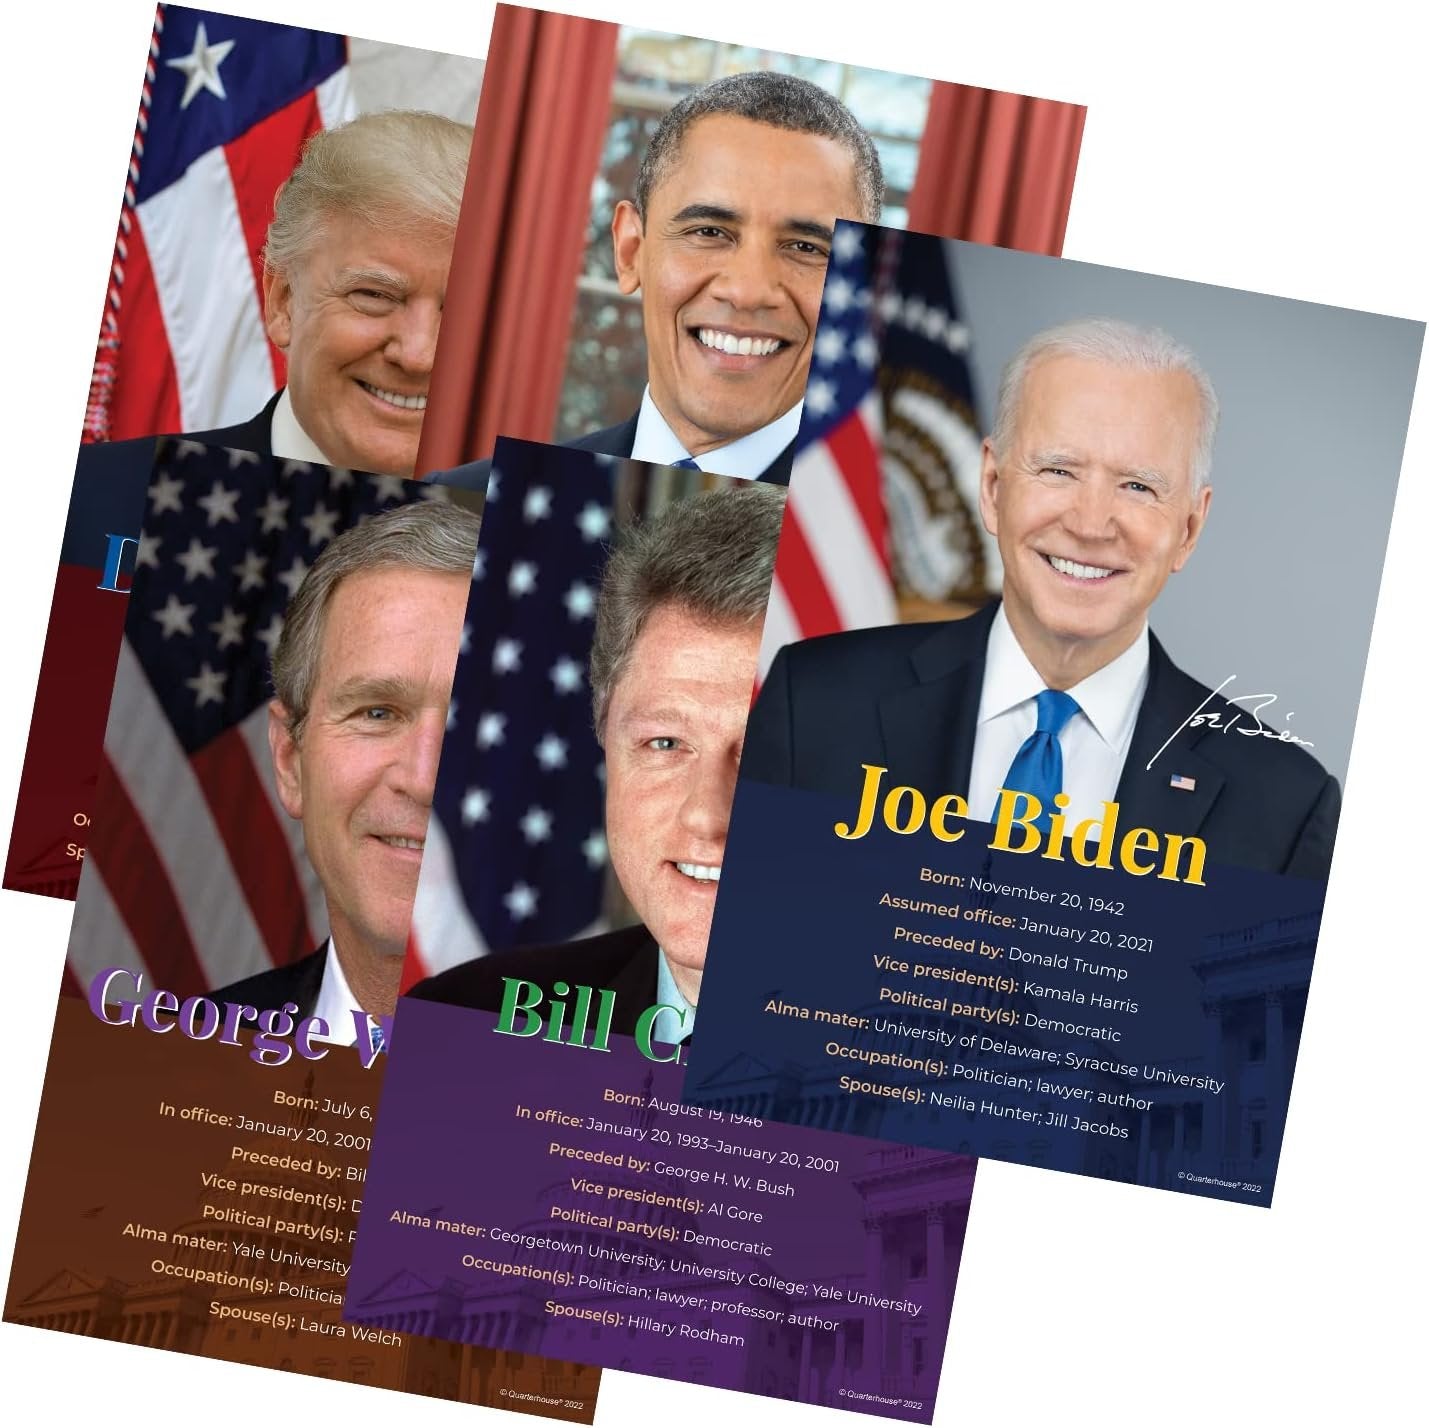 Quarterhouse Previous Five Presidents (Clinton - Biden) Poster Set, Social Studies Classroom Learning Materials for K-12 Students and Teachers, Set of 5, 12 x 18 Inches, Extra Durable